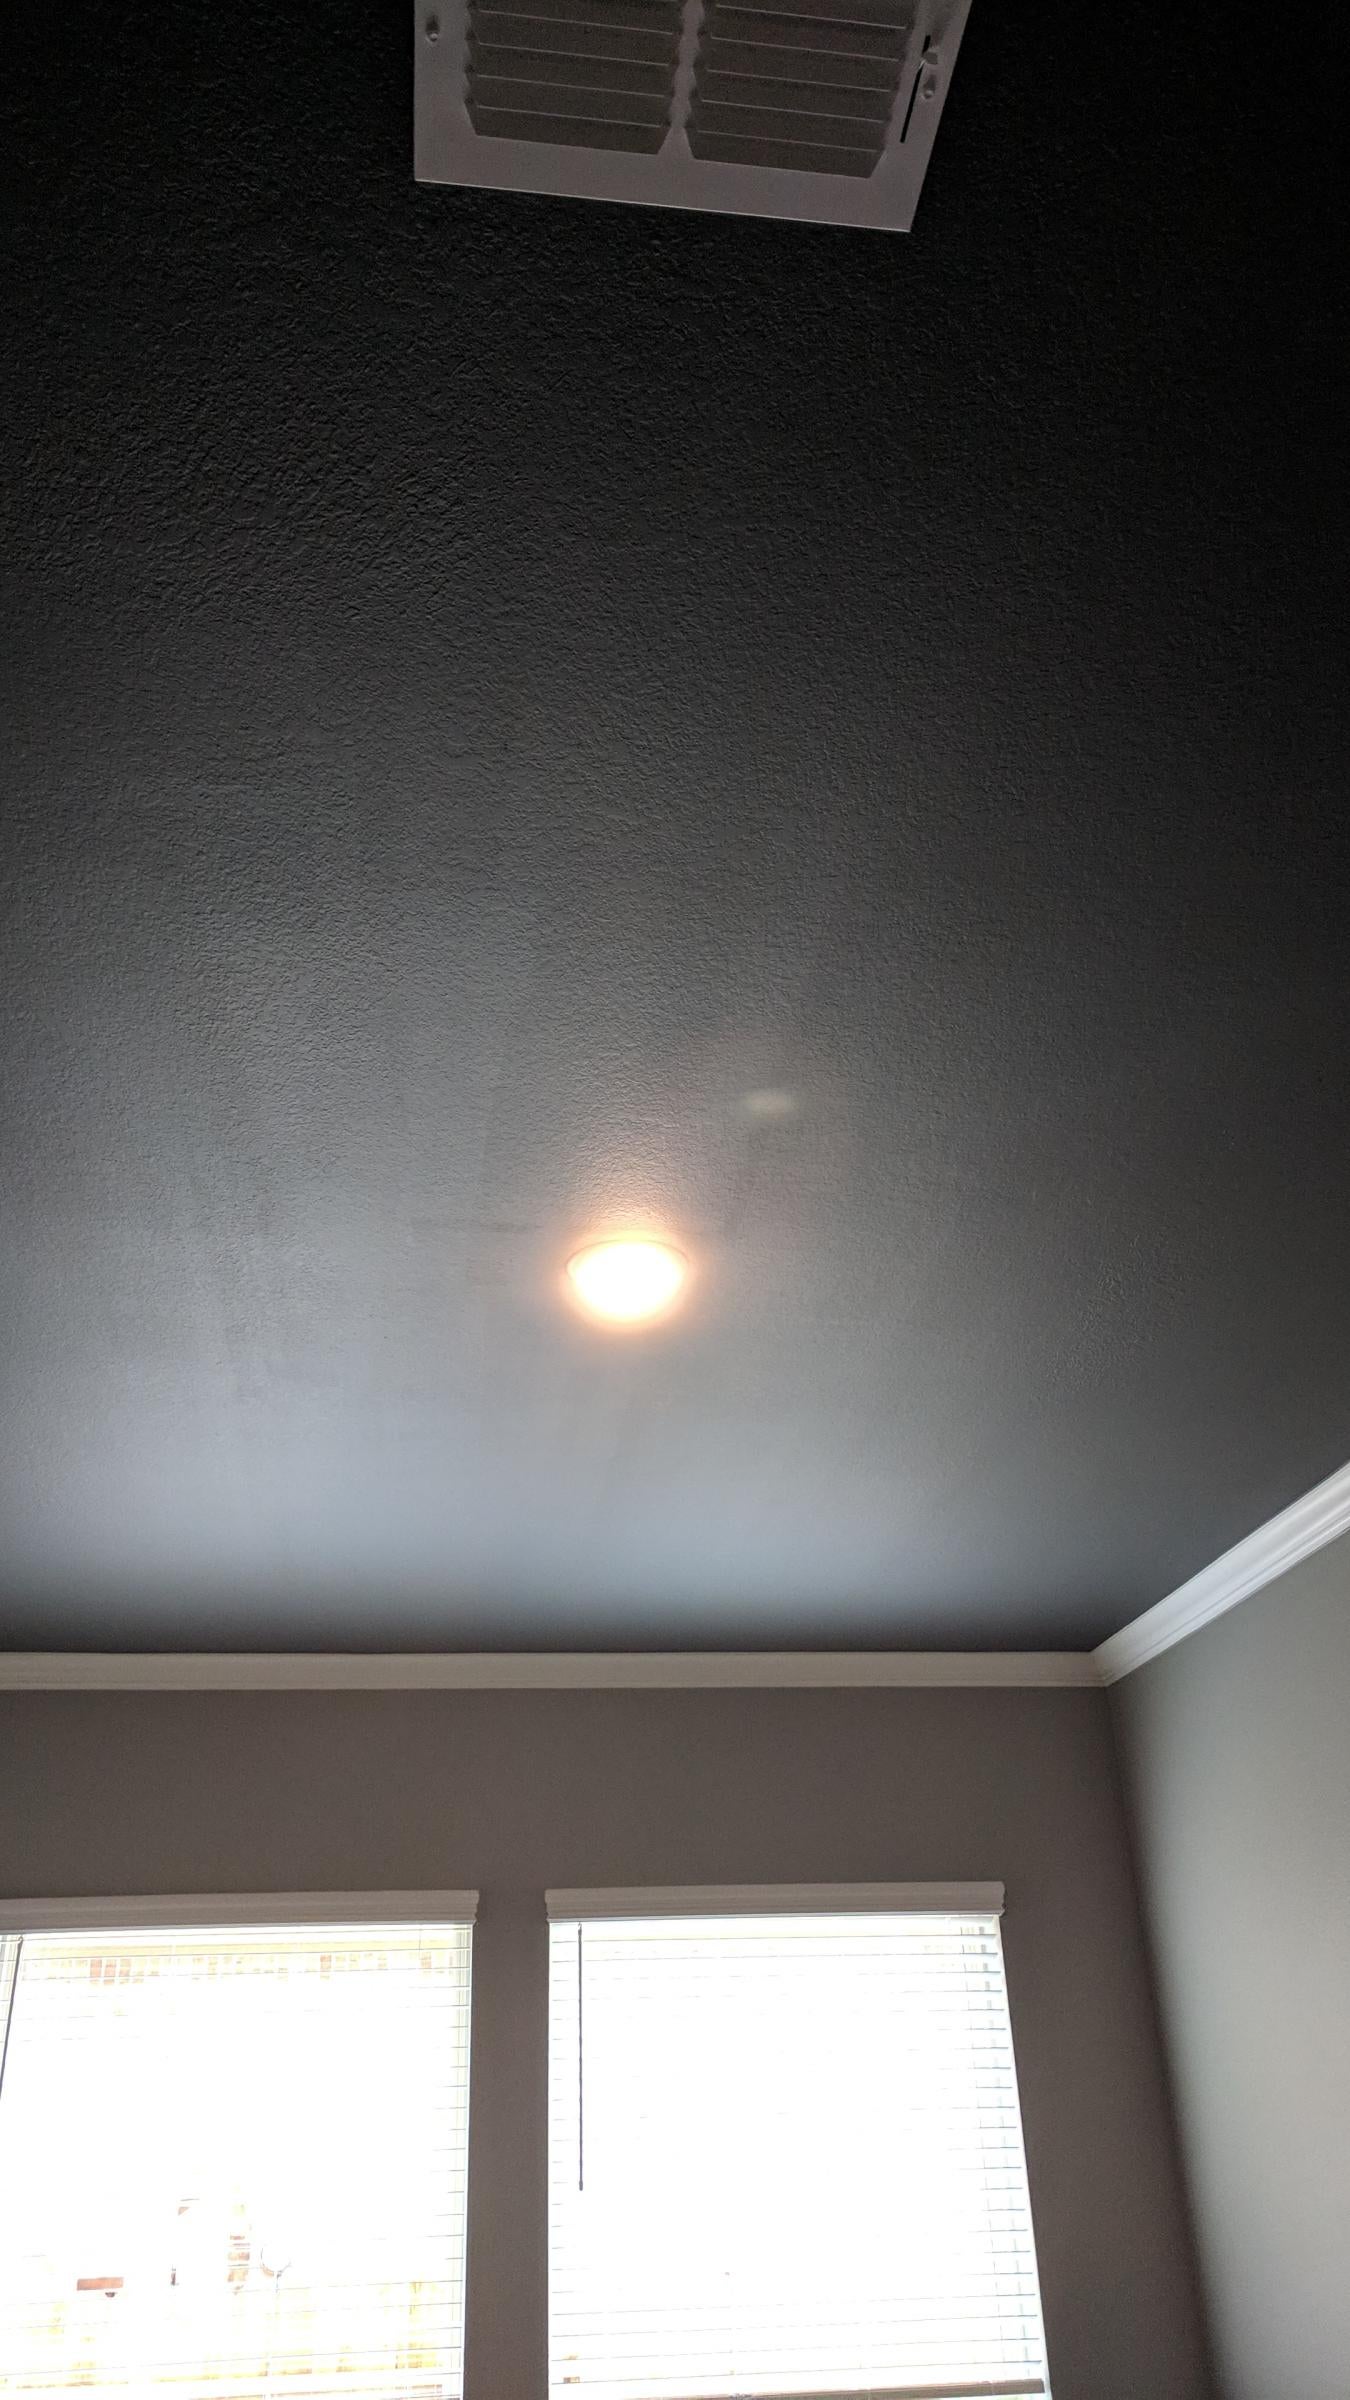 Flat Superpaint Ceiling Sheen And